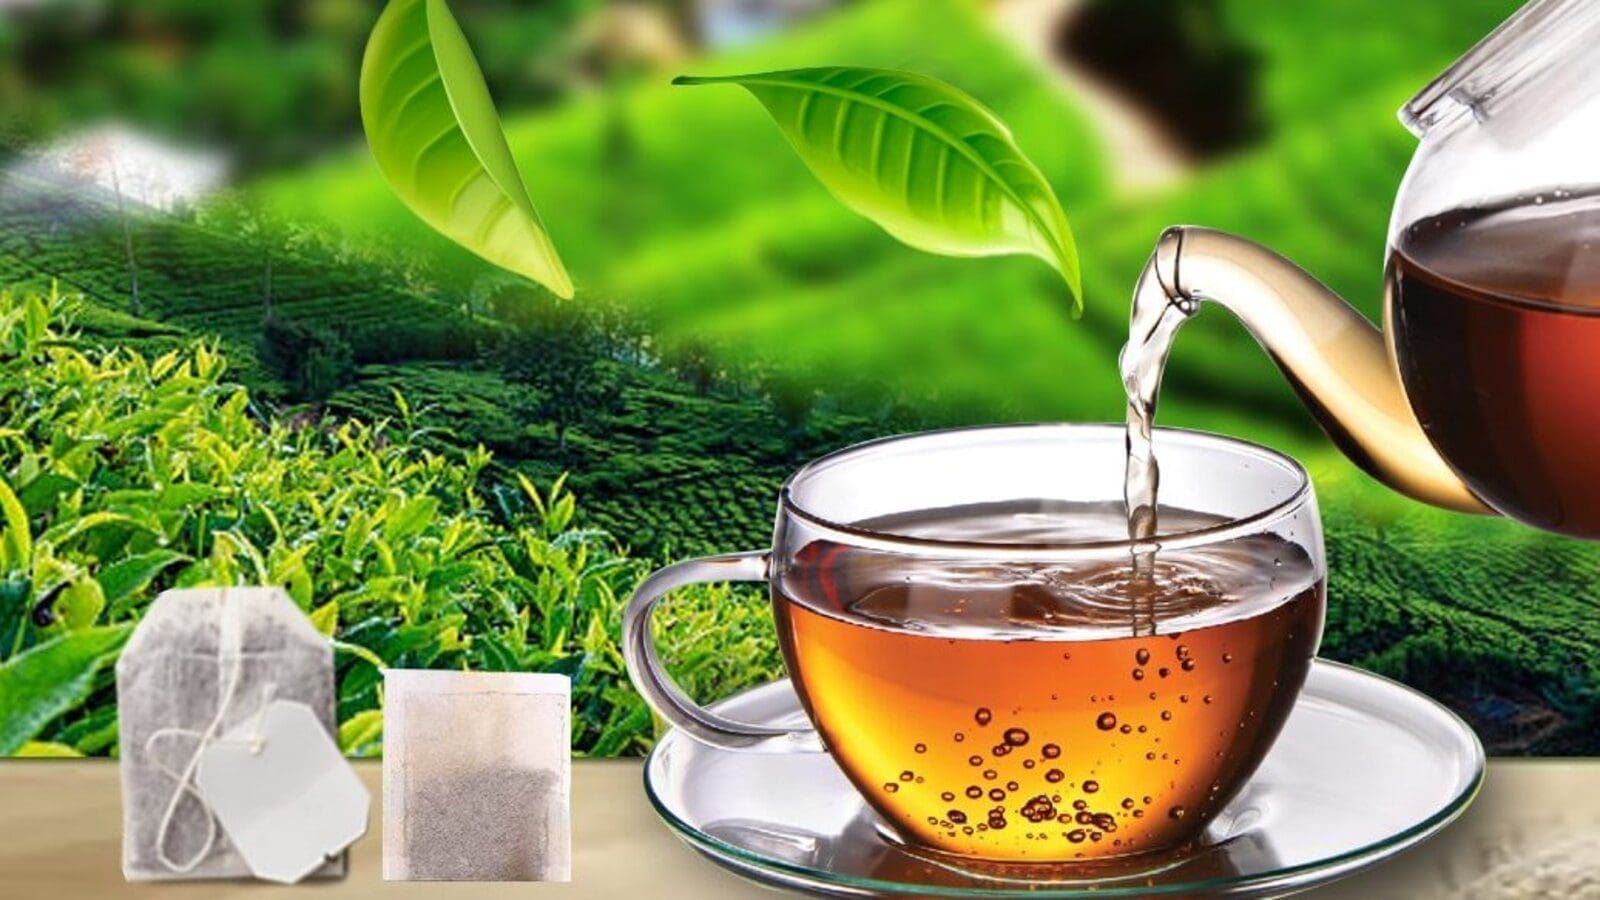 Kenyan tea export prices rally on back of stabilized demand to highest level in 8 years